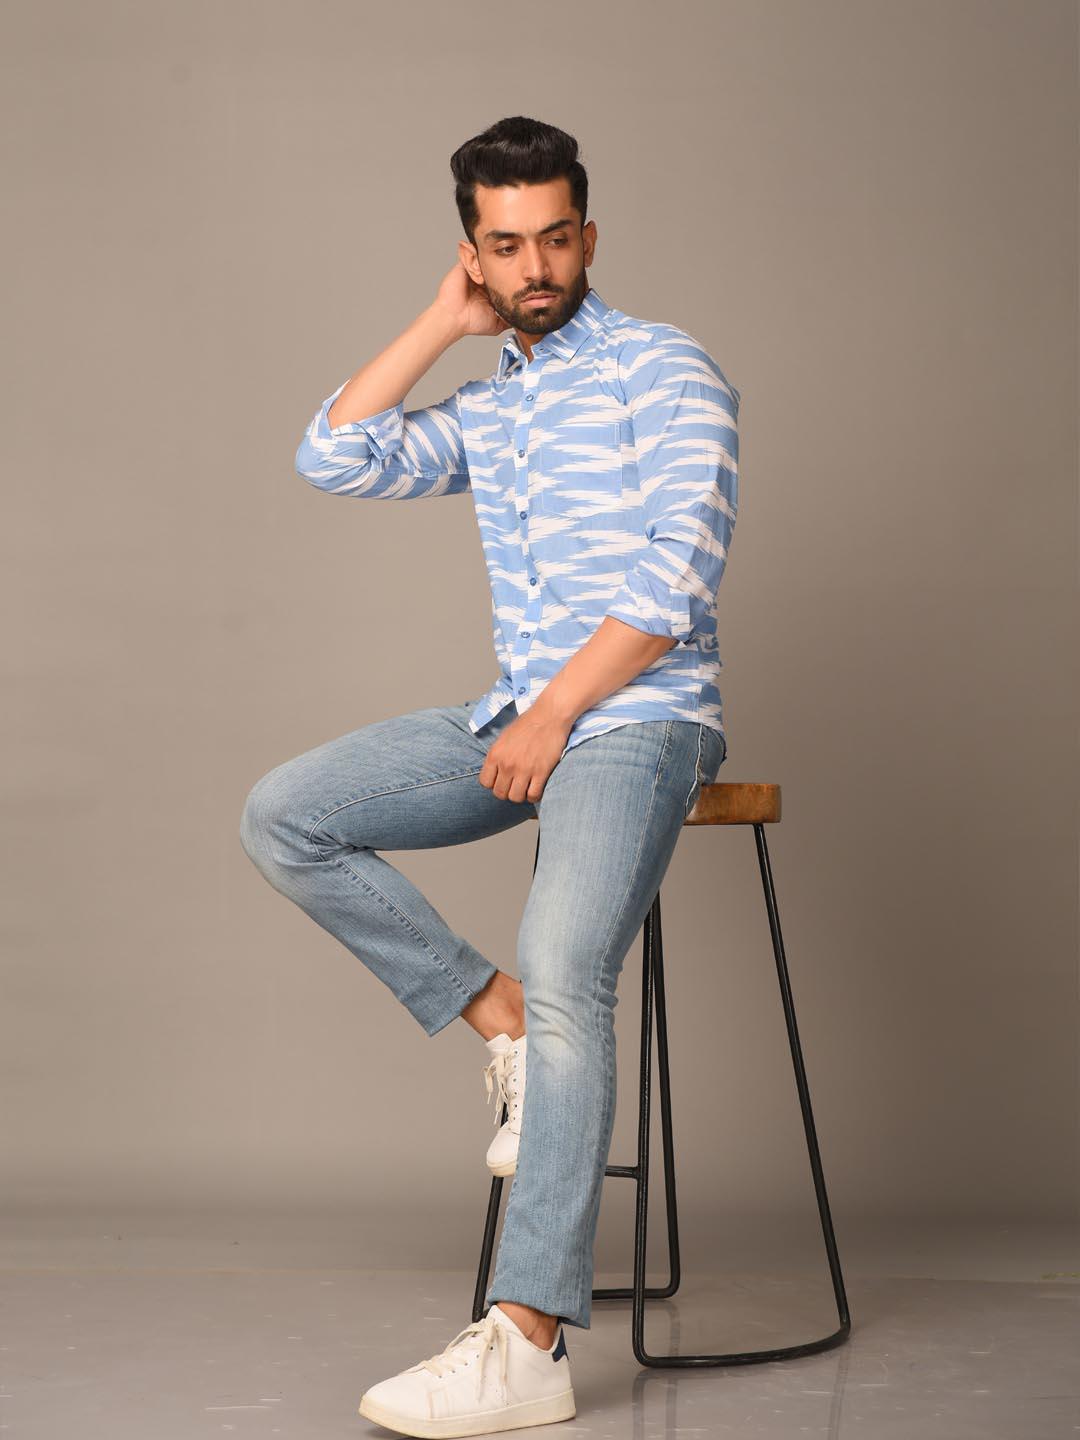 Buy Light Blue Ikat Printed Cotton Shirt Online At Best Prices | Tistabene